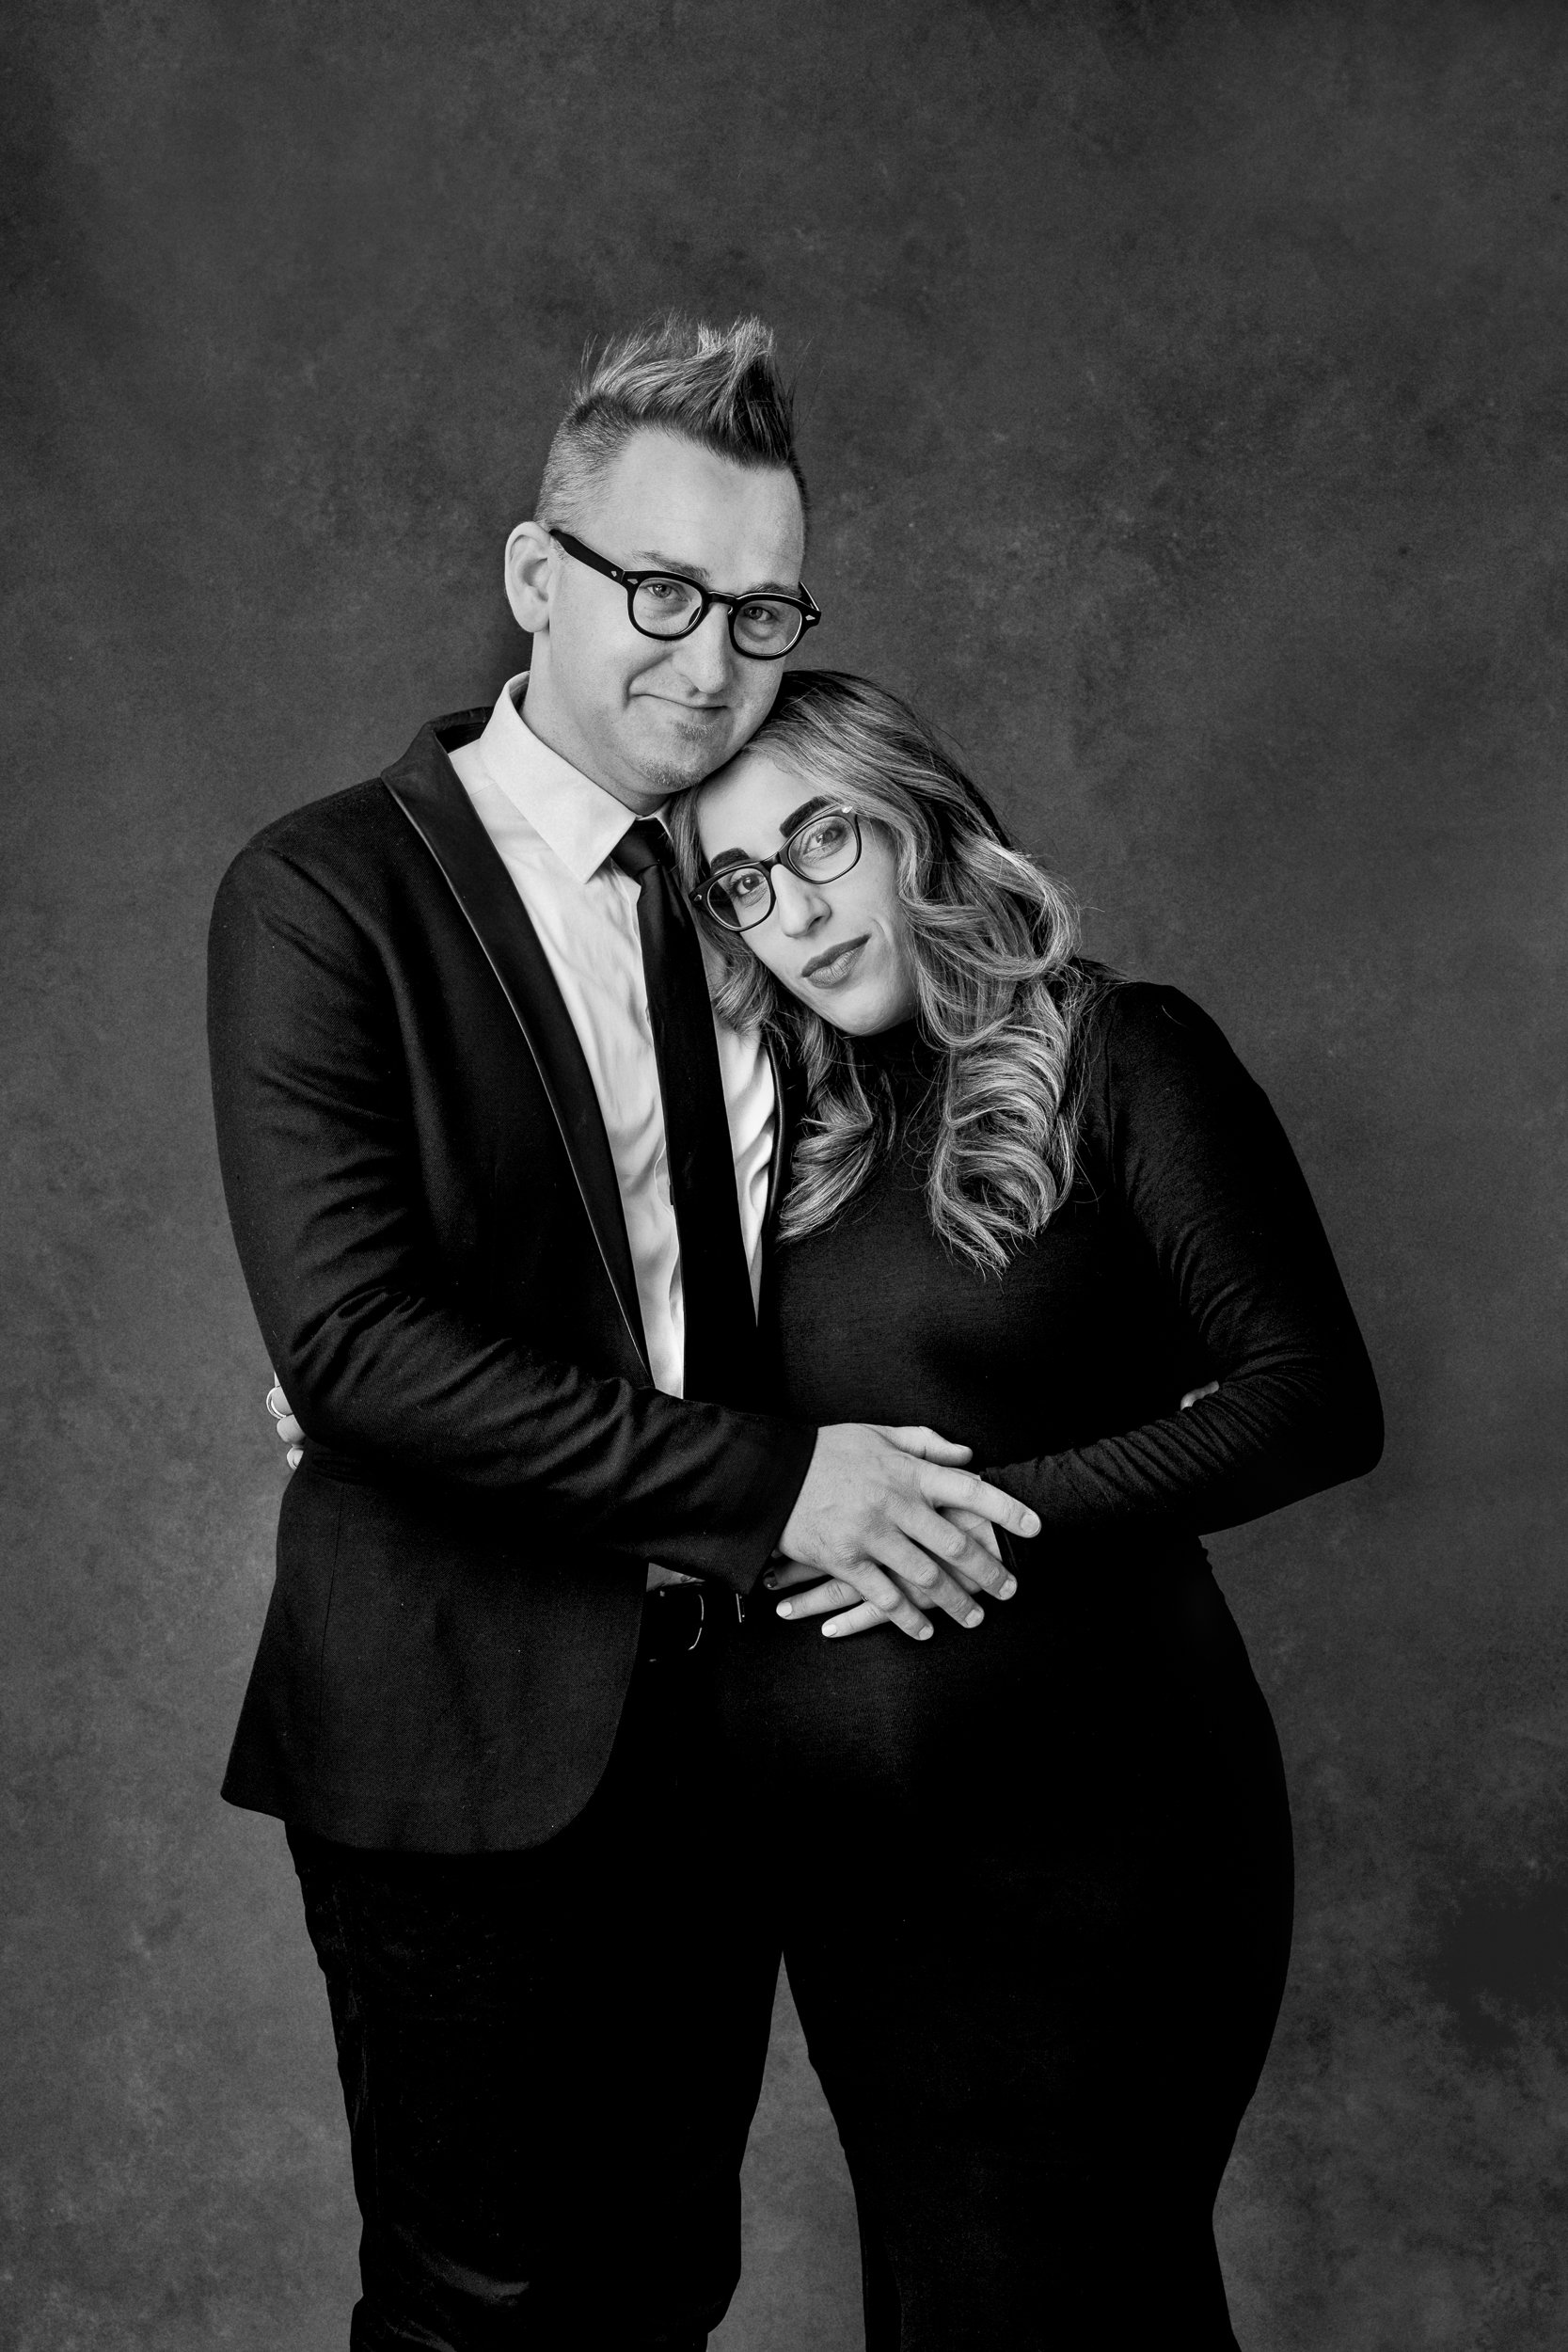  NJ photographer Nicole Hawkins Photography takes a studio maternity session of a couple wearing black. couple with glasses black and white #NicoleHawkinsPhotography #maternitysession #NJmaternityphotographer #NewJerseyphotographers #maternityphotos 